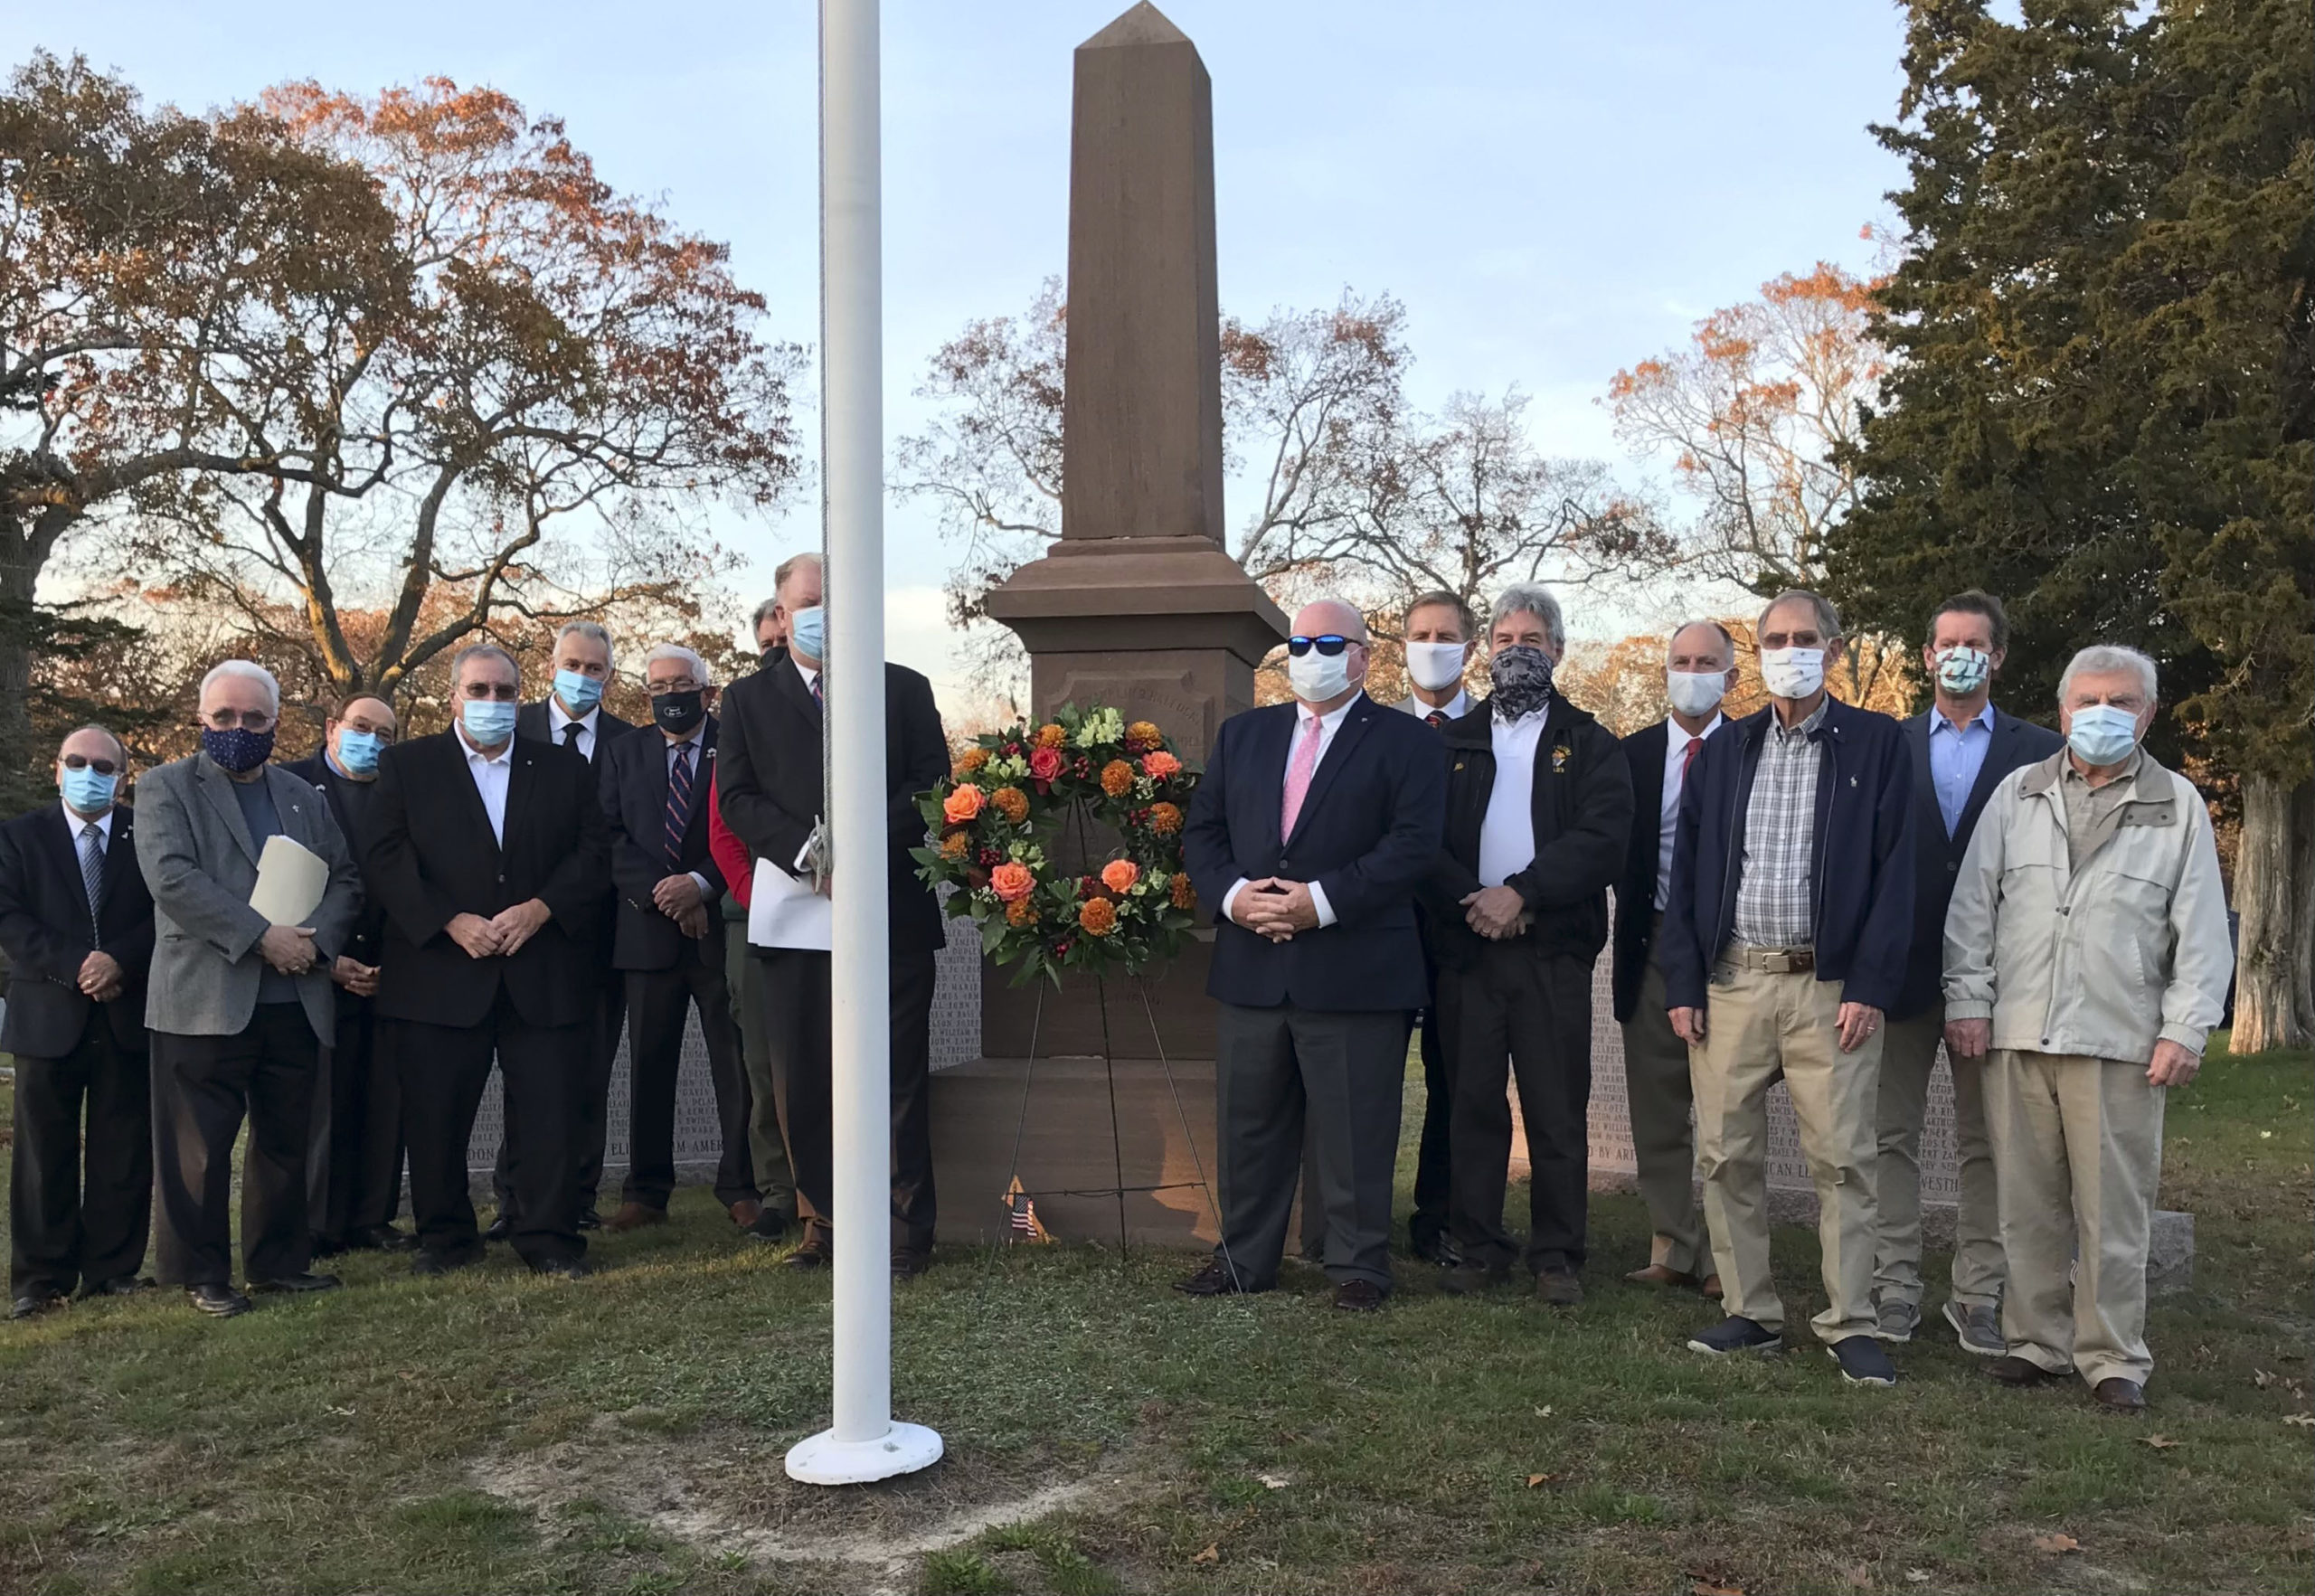 The Knights of Columbus #7423 displayed a wreath in front of the Veterans Memorial at the Westhampton Cemetery in honor of Veterans Day.